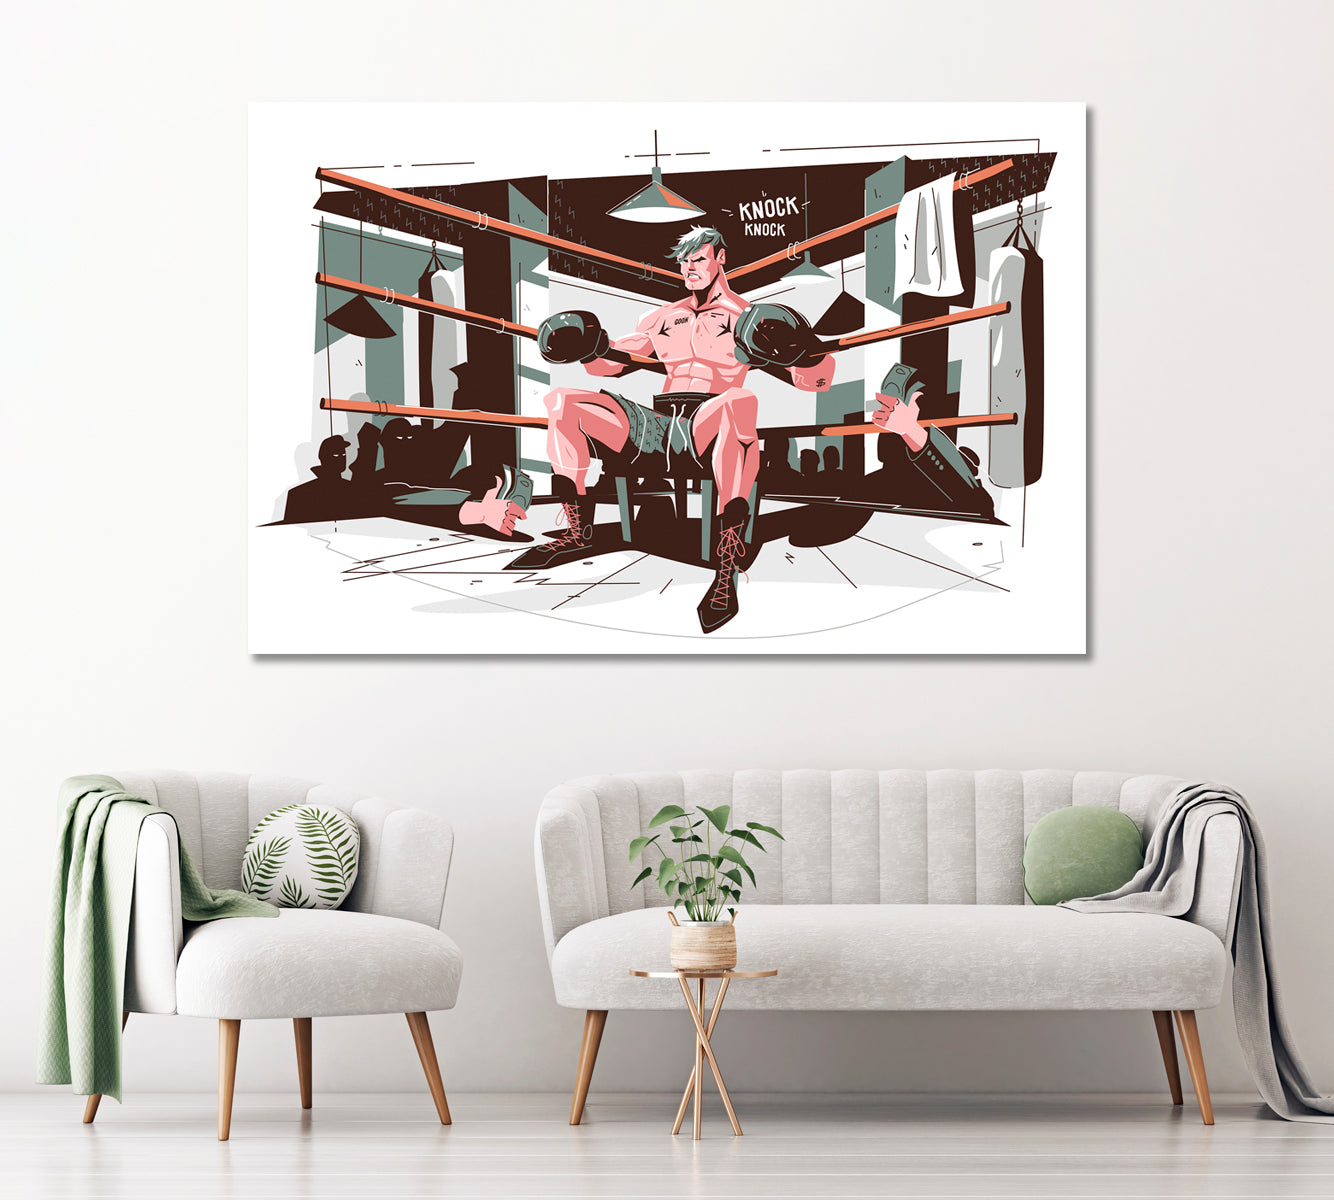 Boxer on Boxing Ring Canvas Print ArtLexy 1 Panel 24"x16" inches 